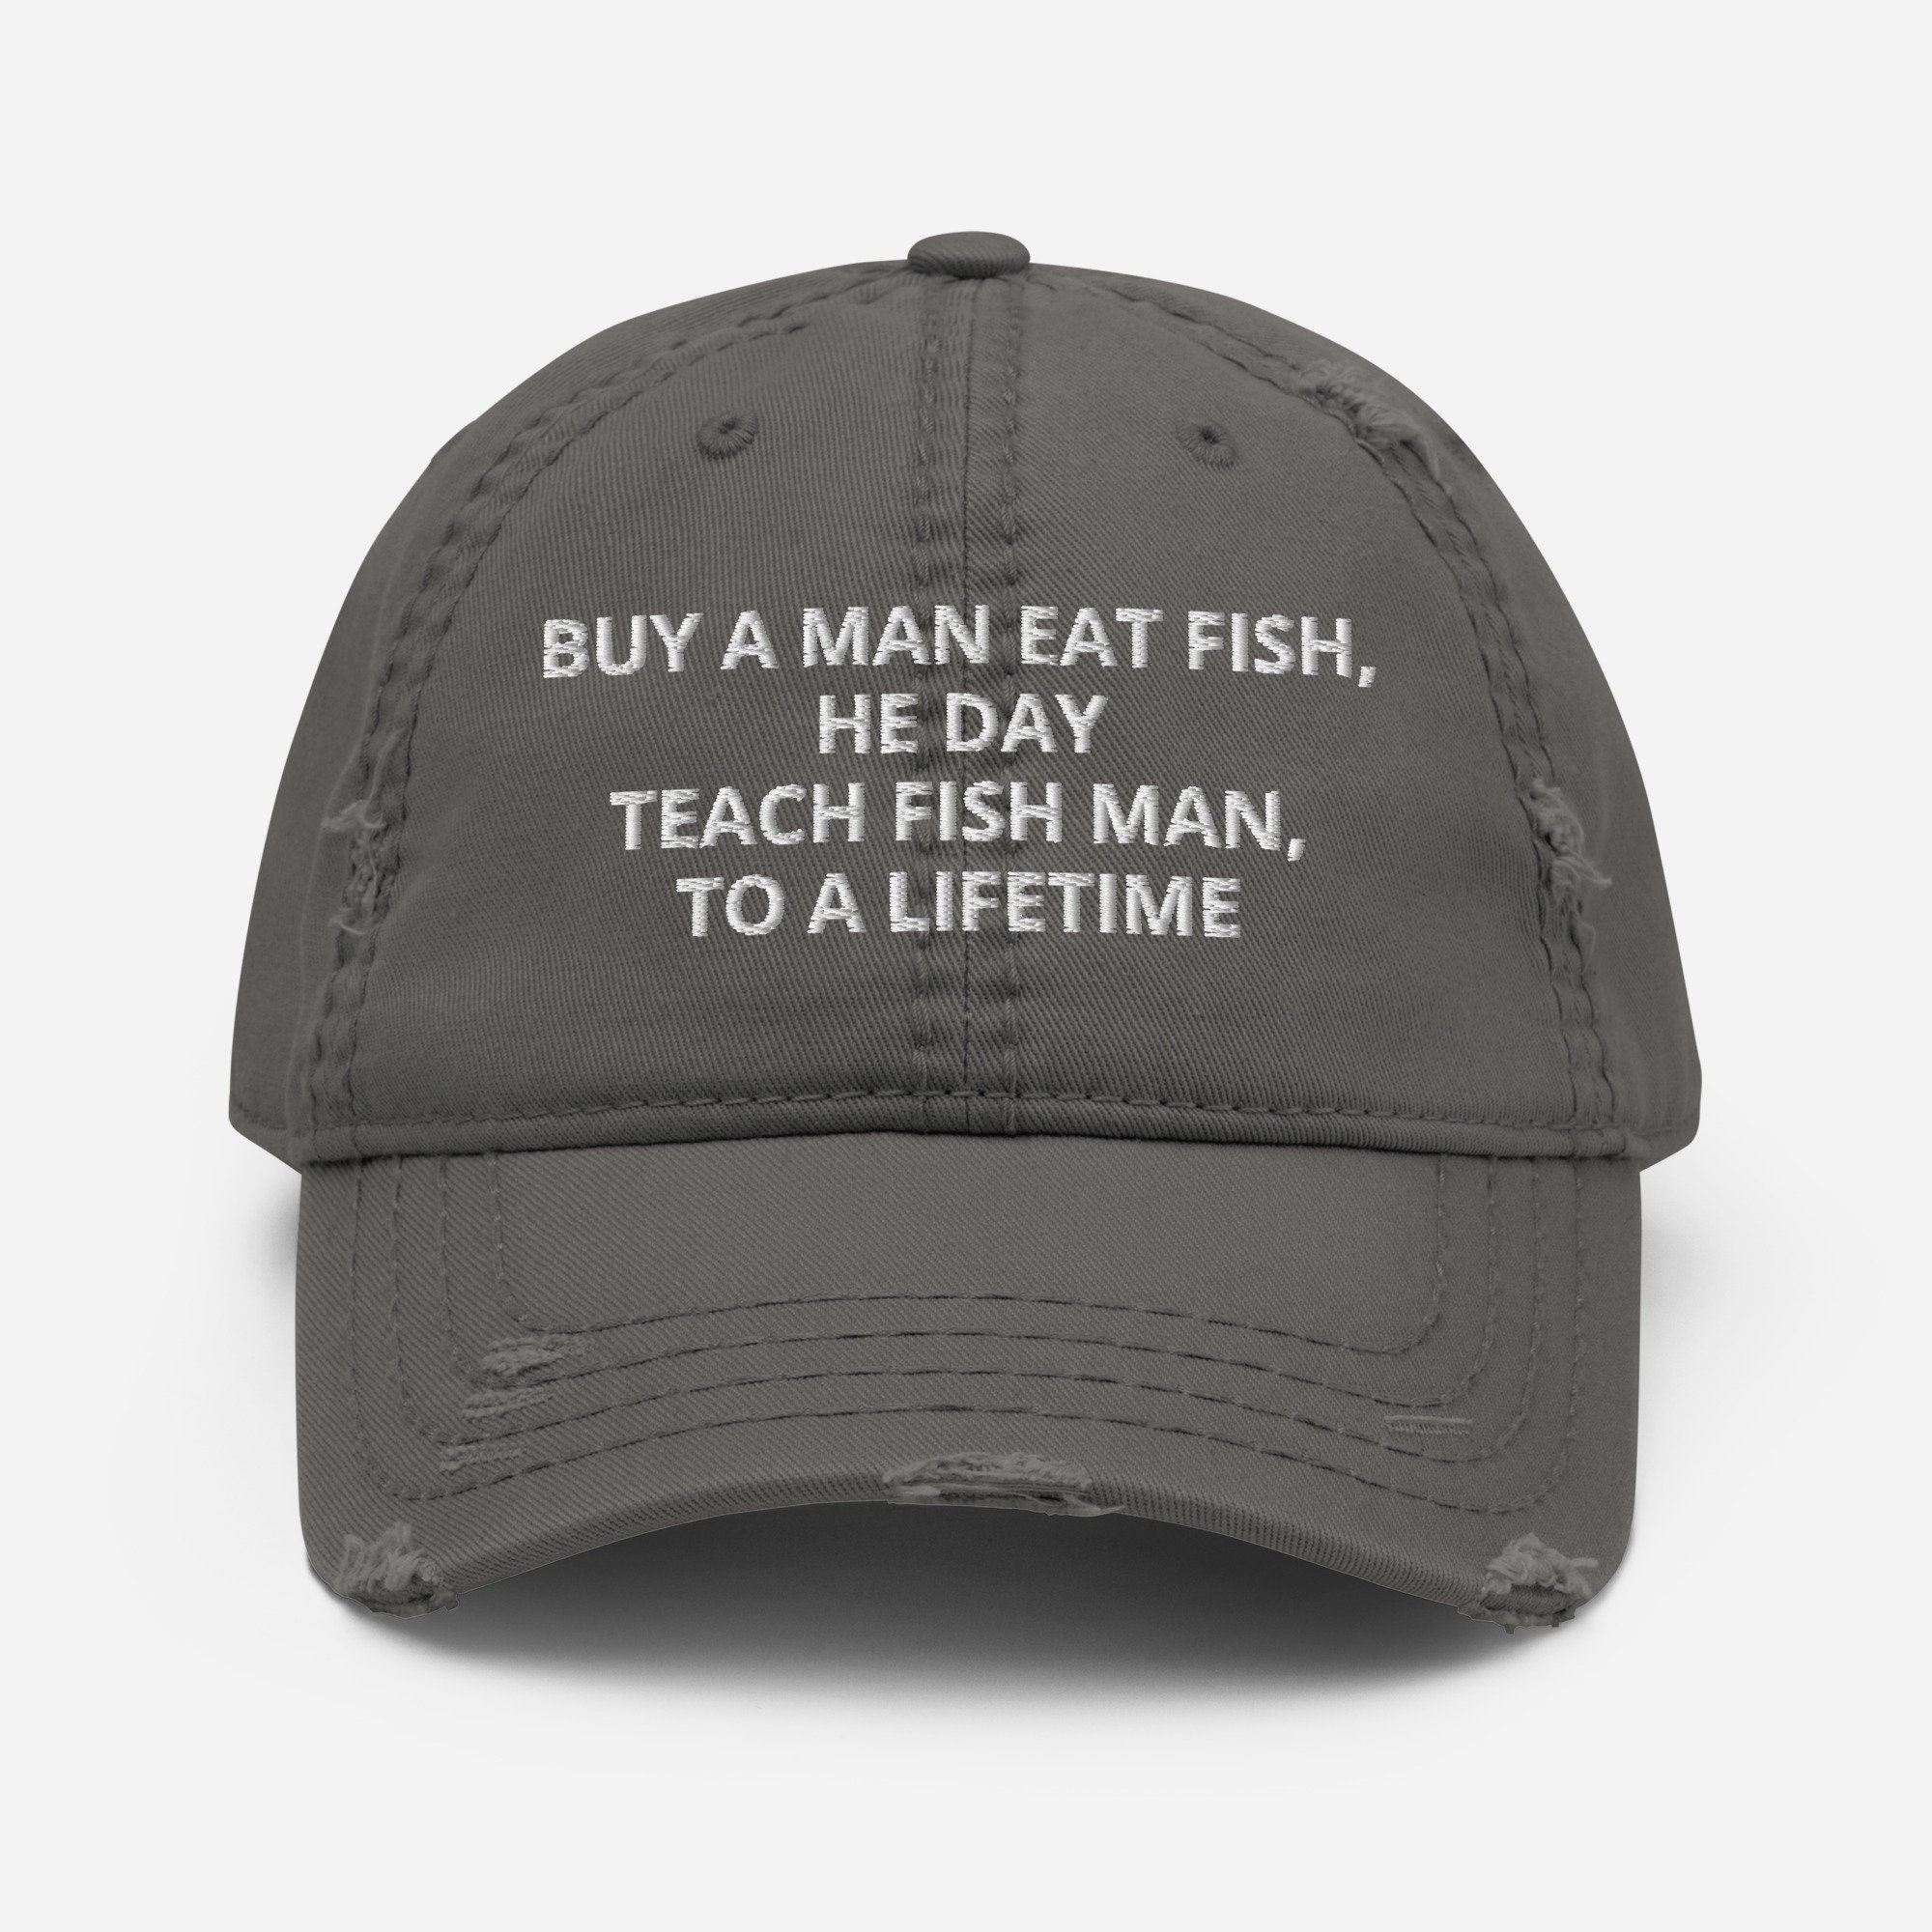 Buy a Man Eat Fish He Day, Teach Man to a Lifetime Distressed Dad Hat  Embroidered Funny Joe Biden Cap, Funny Dad Hat Gift, Anti Biden Cap 